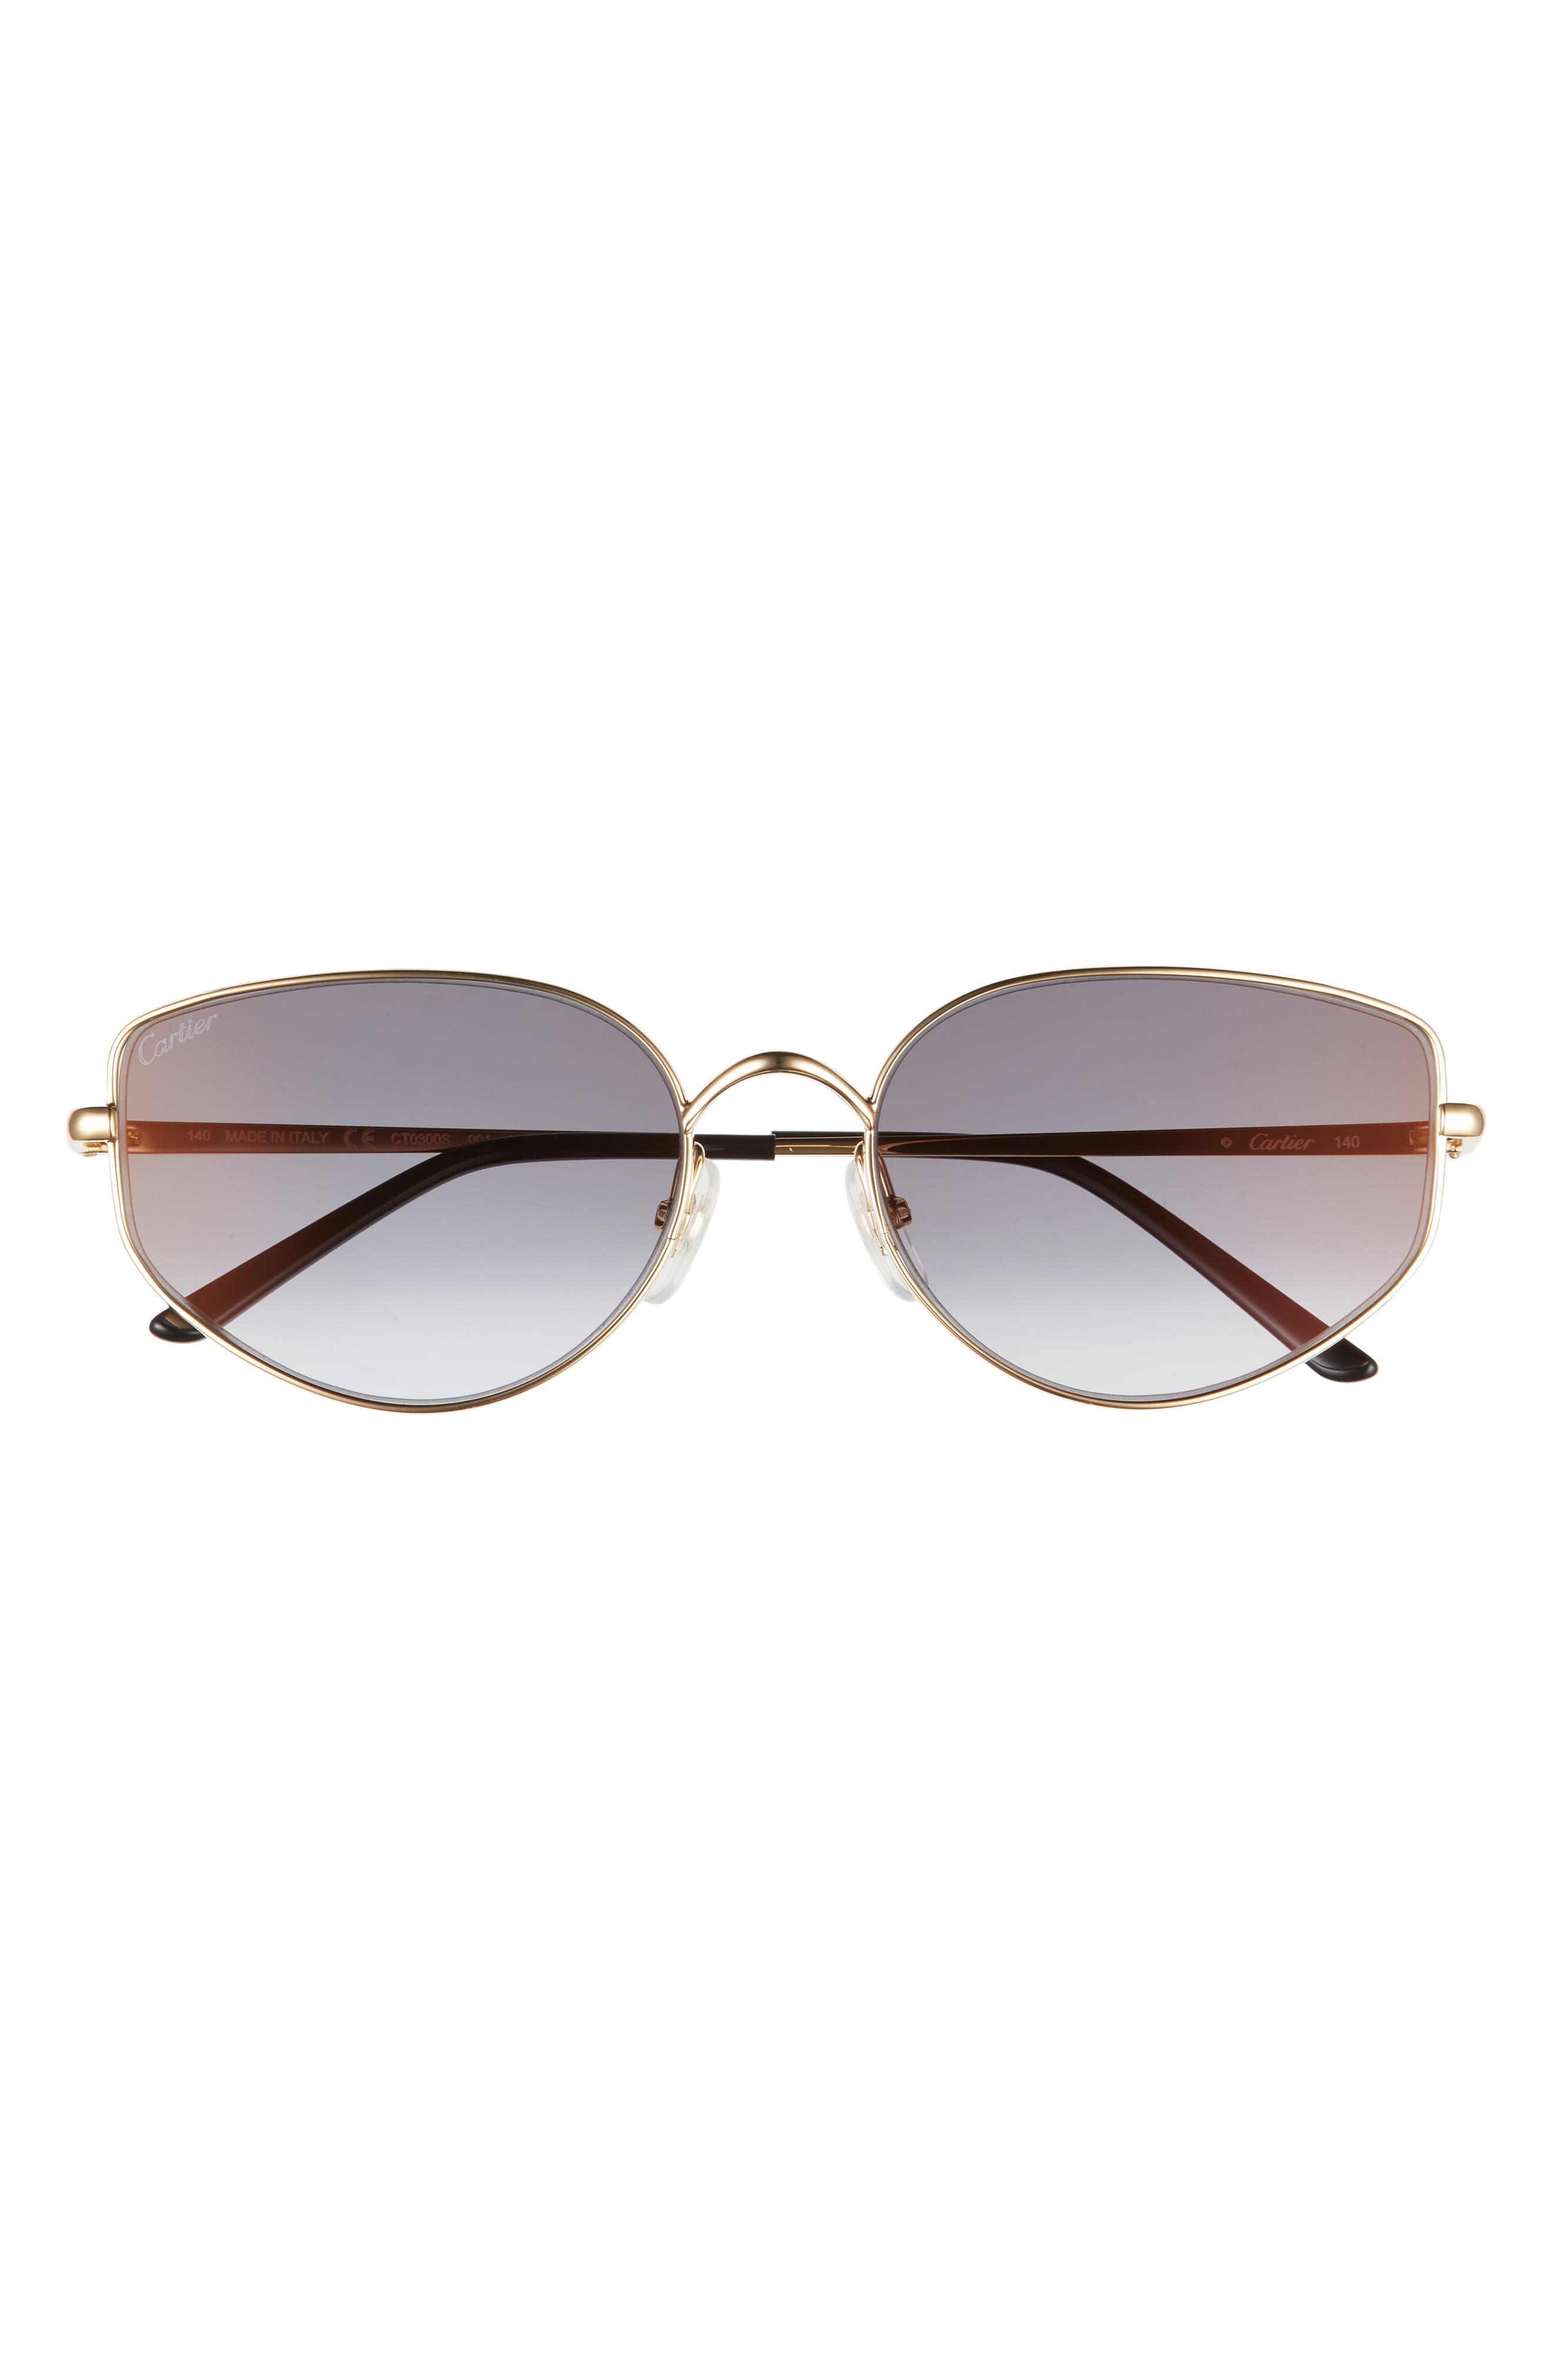 Cartier 58mm Cat Eye Sunglasses in Gold at Nordstrom